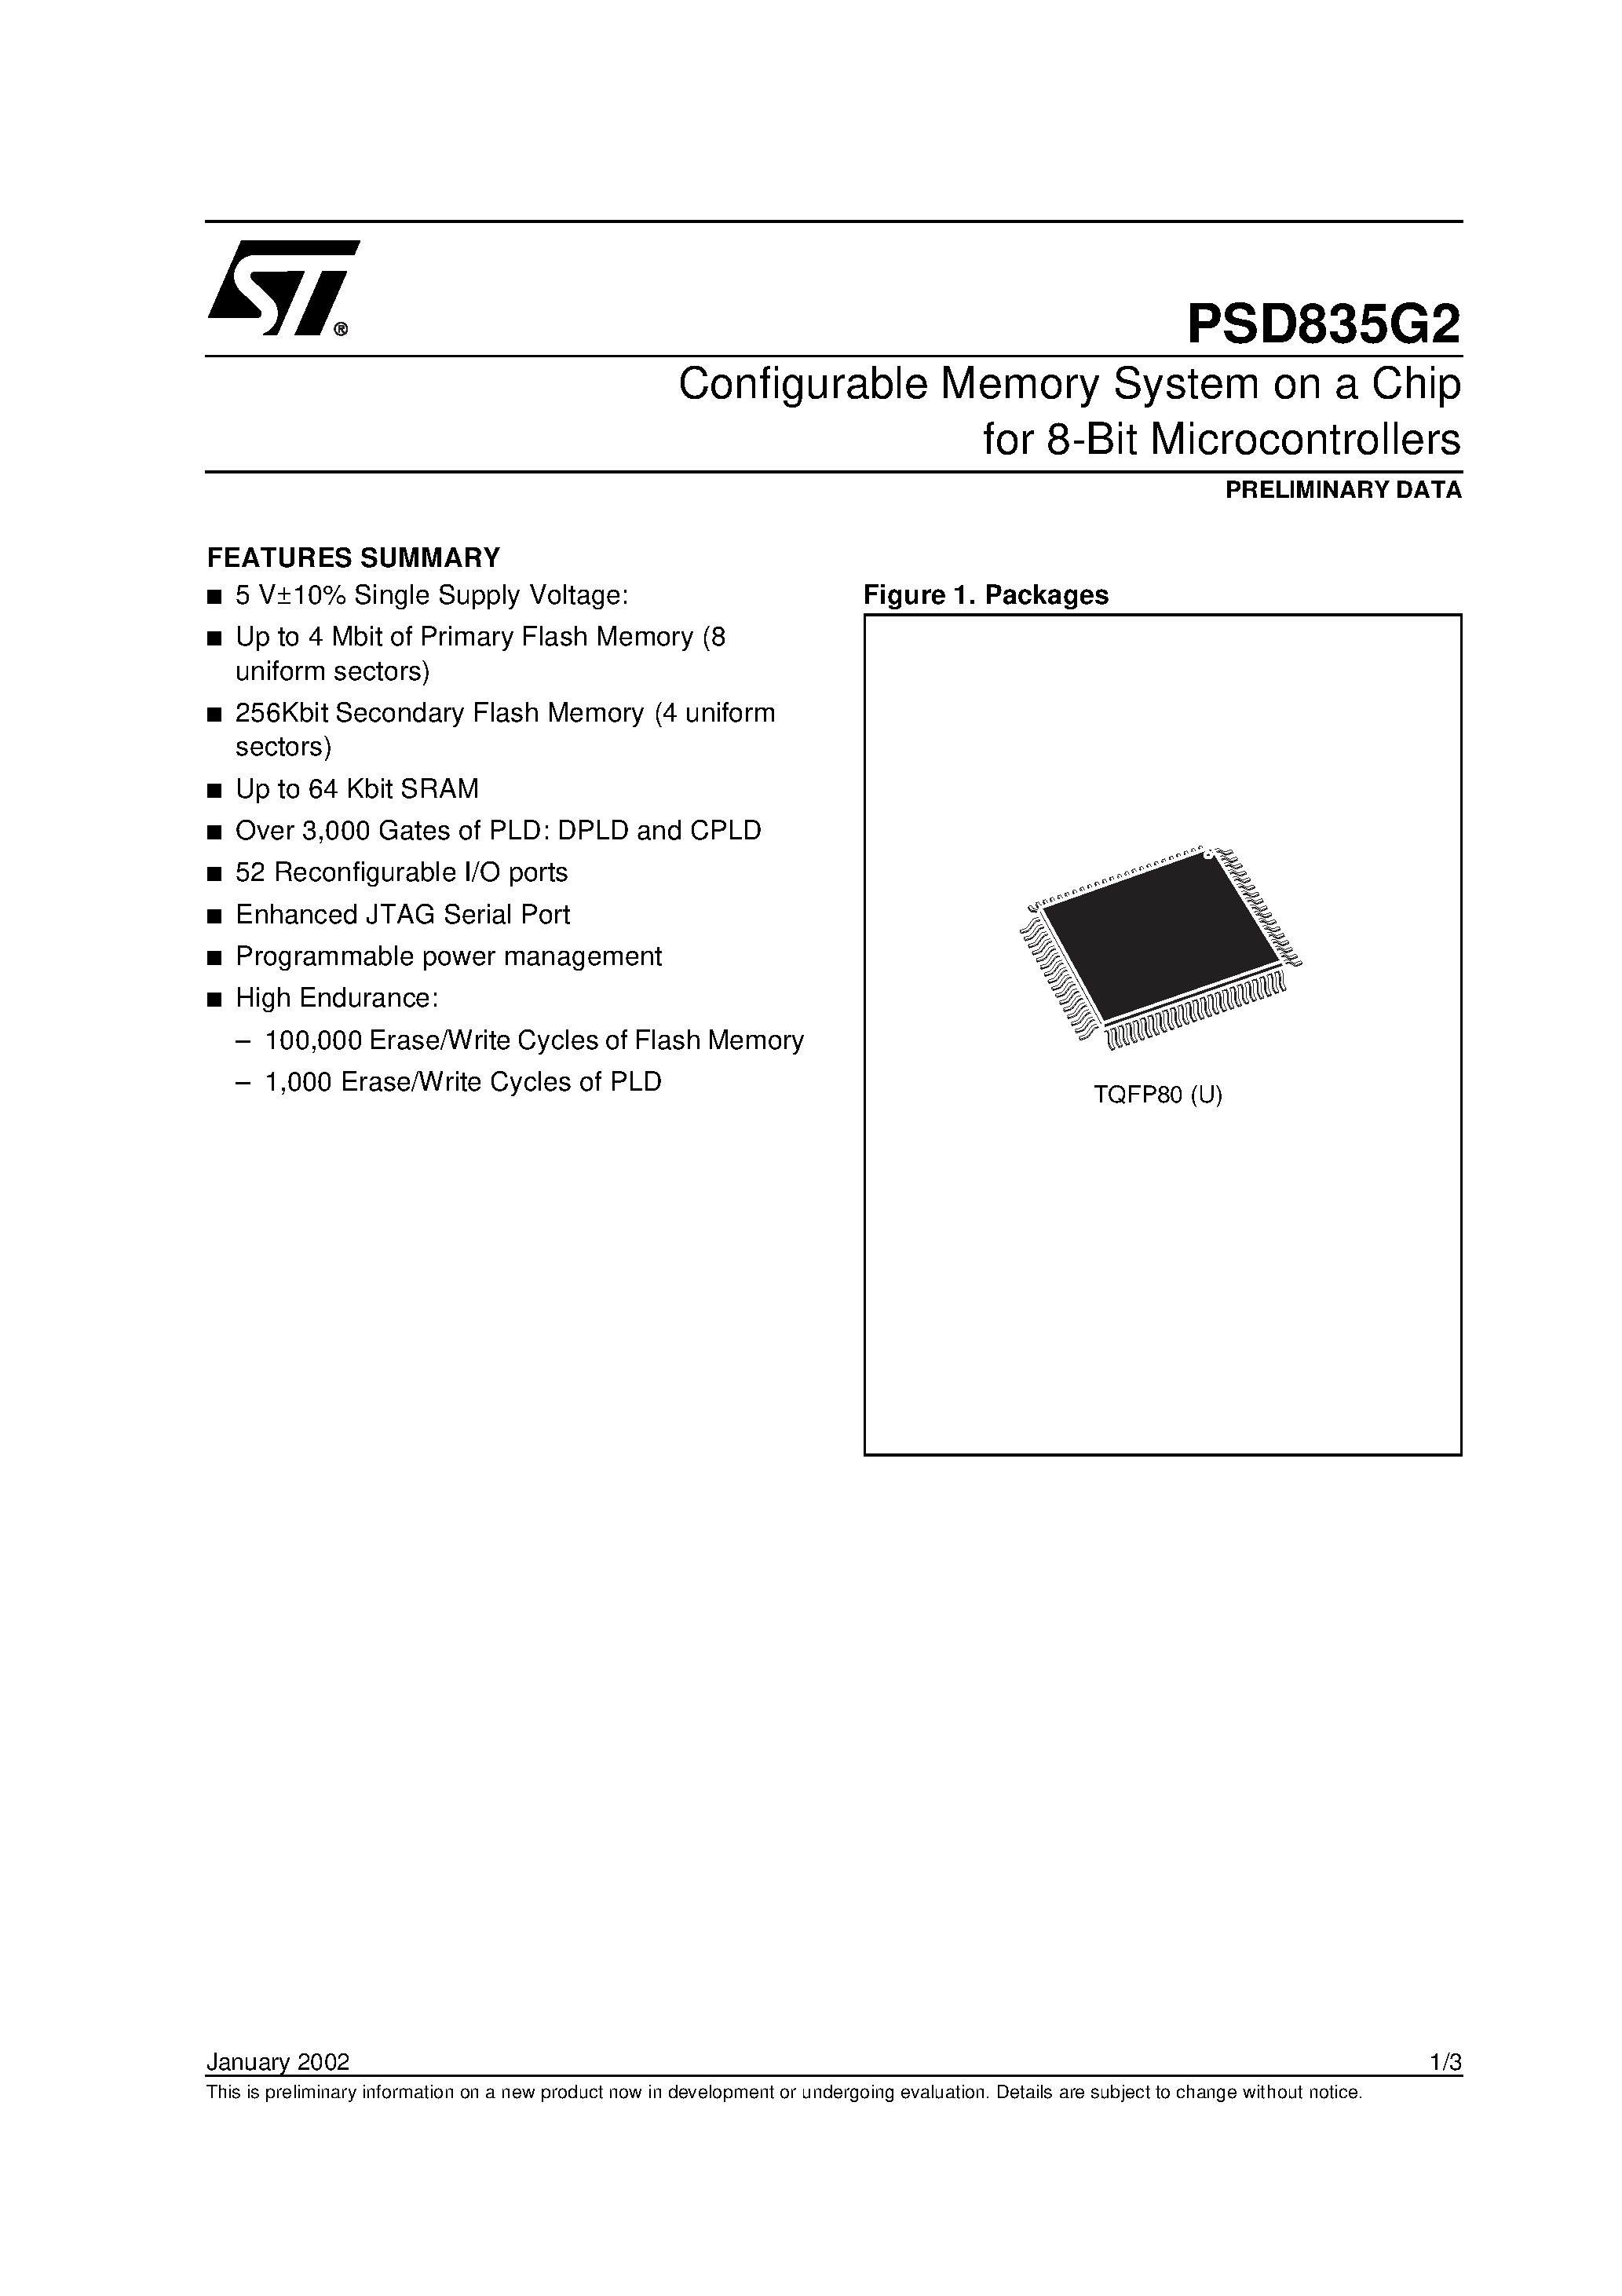 Datasheet PSD835F2V-A-20B81I - Configurable Memory System on a Chip for 8-Bit Microcontrollers page 1